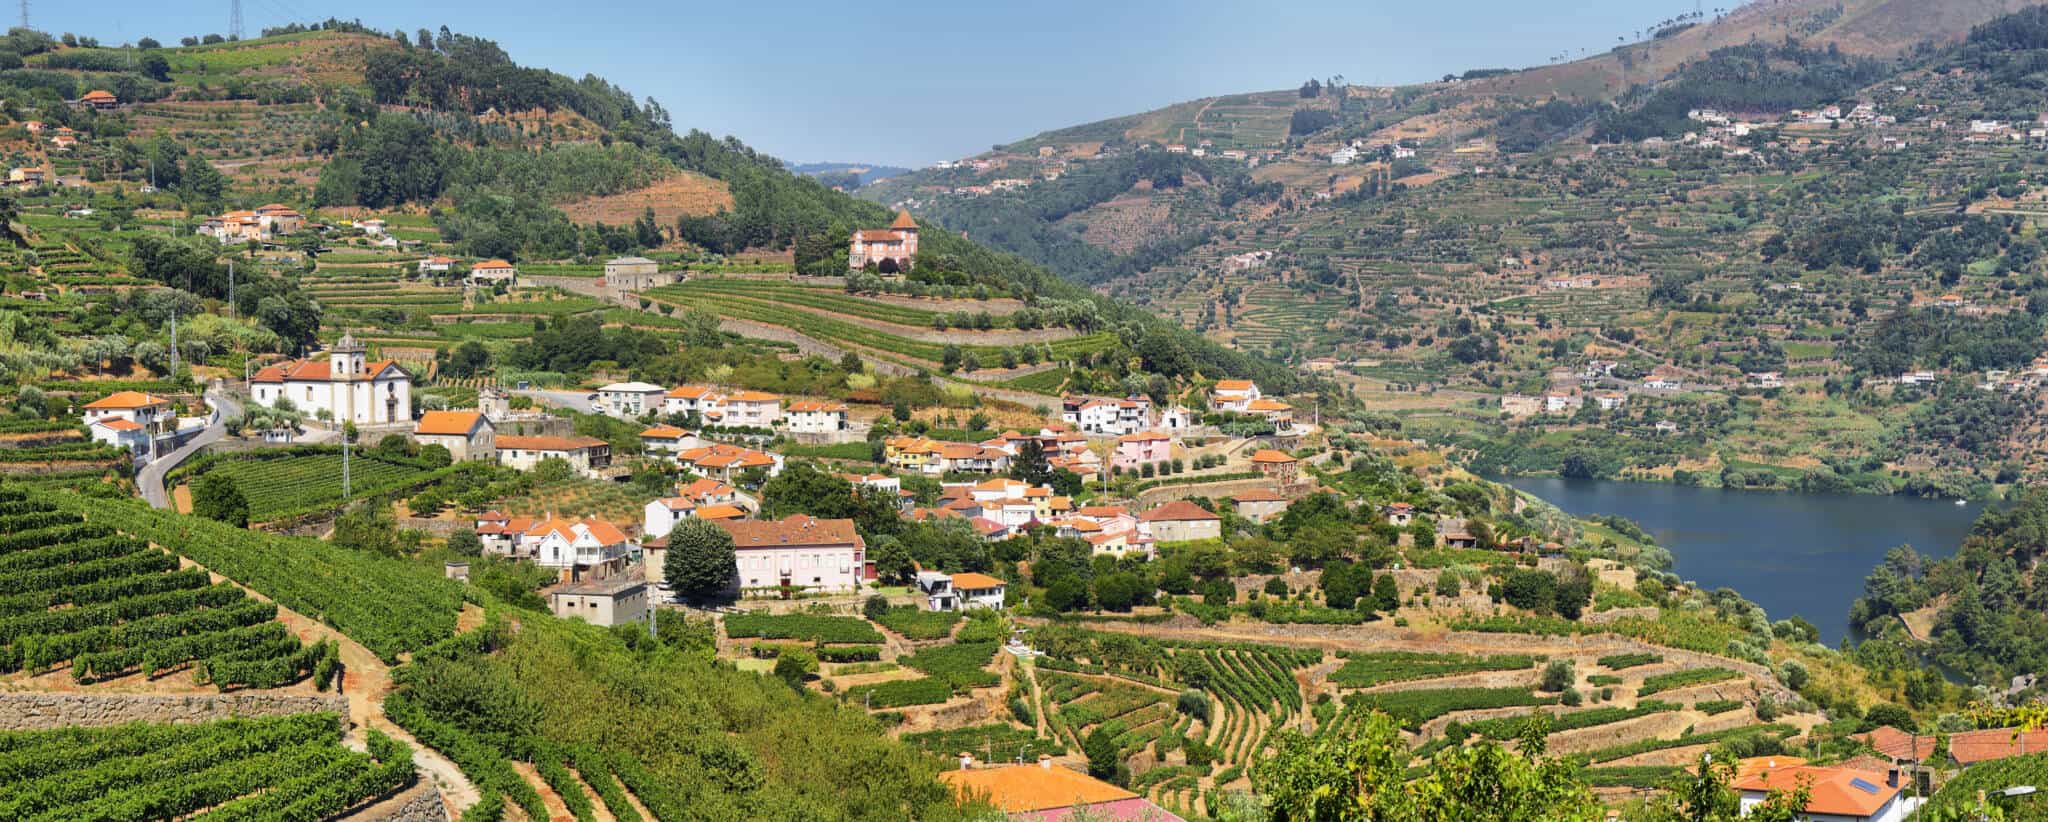 panoramic view of the Douro region in northern Portugal